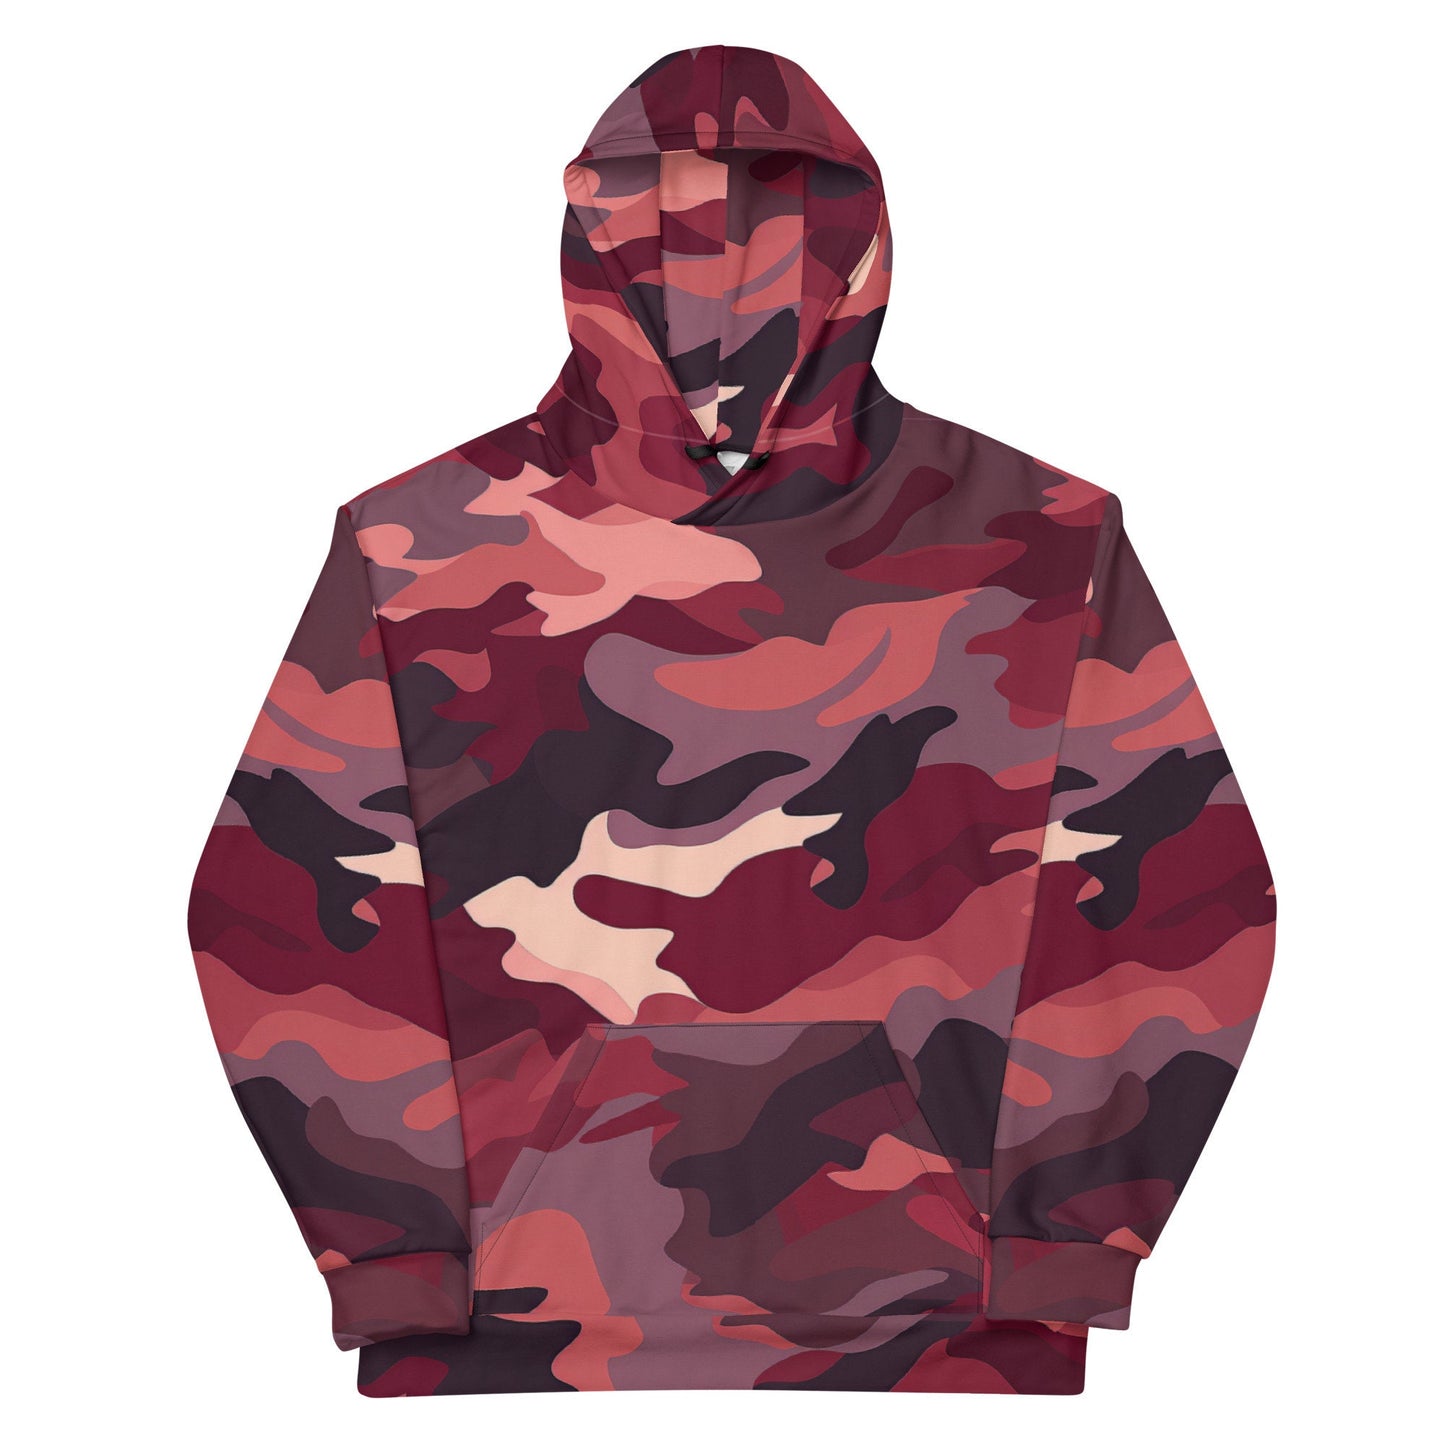 Funky Tiger® Camouflage Hoodie in Crimson/Maroon/Burgundy For Gameday| Sports | Events | Party | Everyday| Crimson | Maroon,Fall